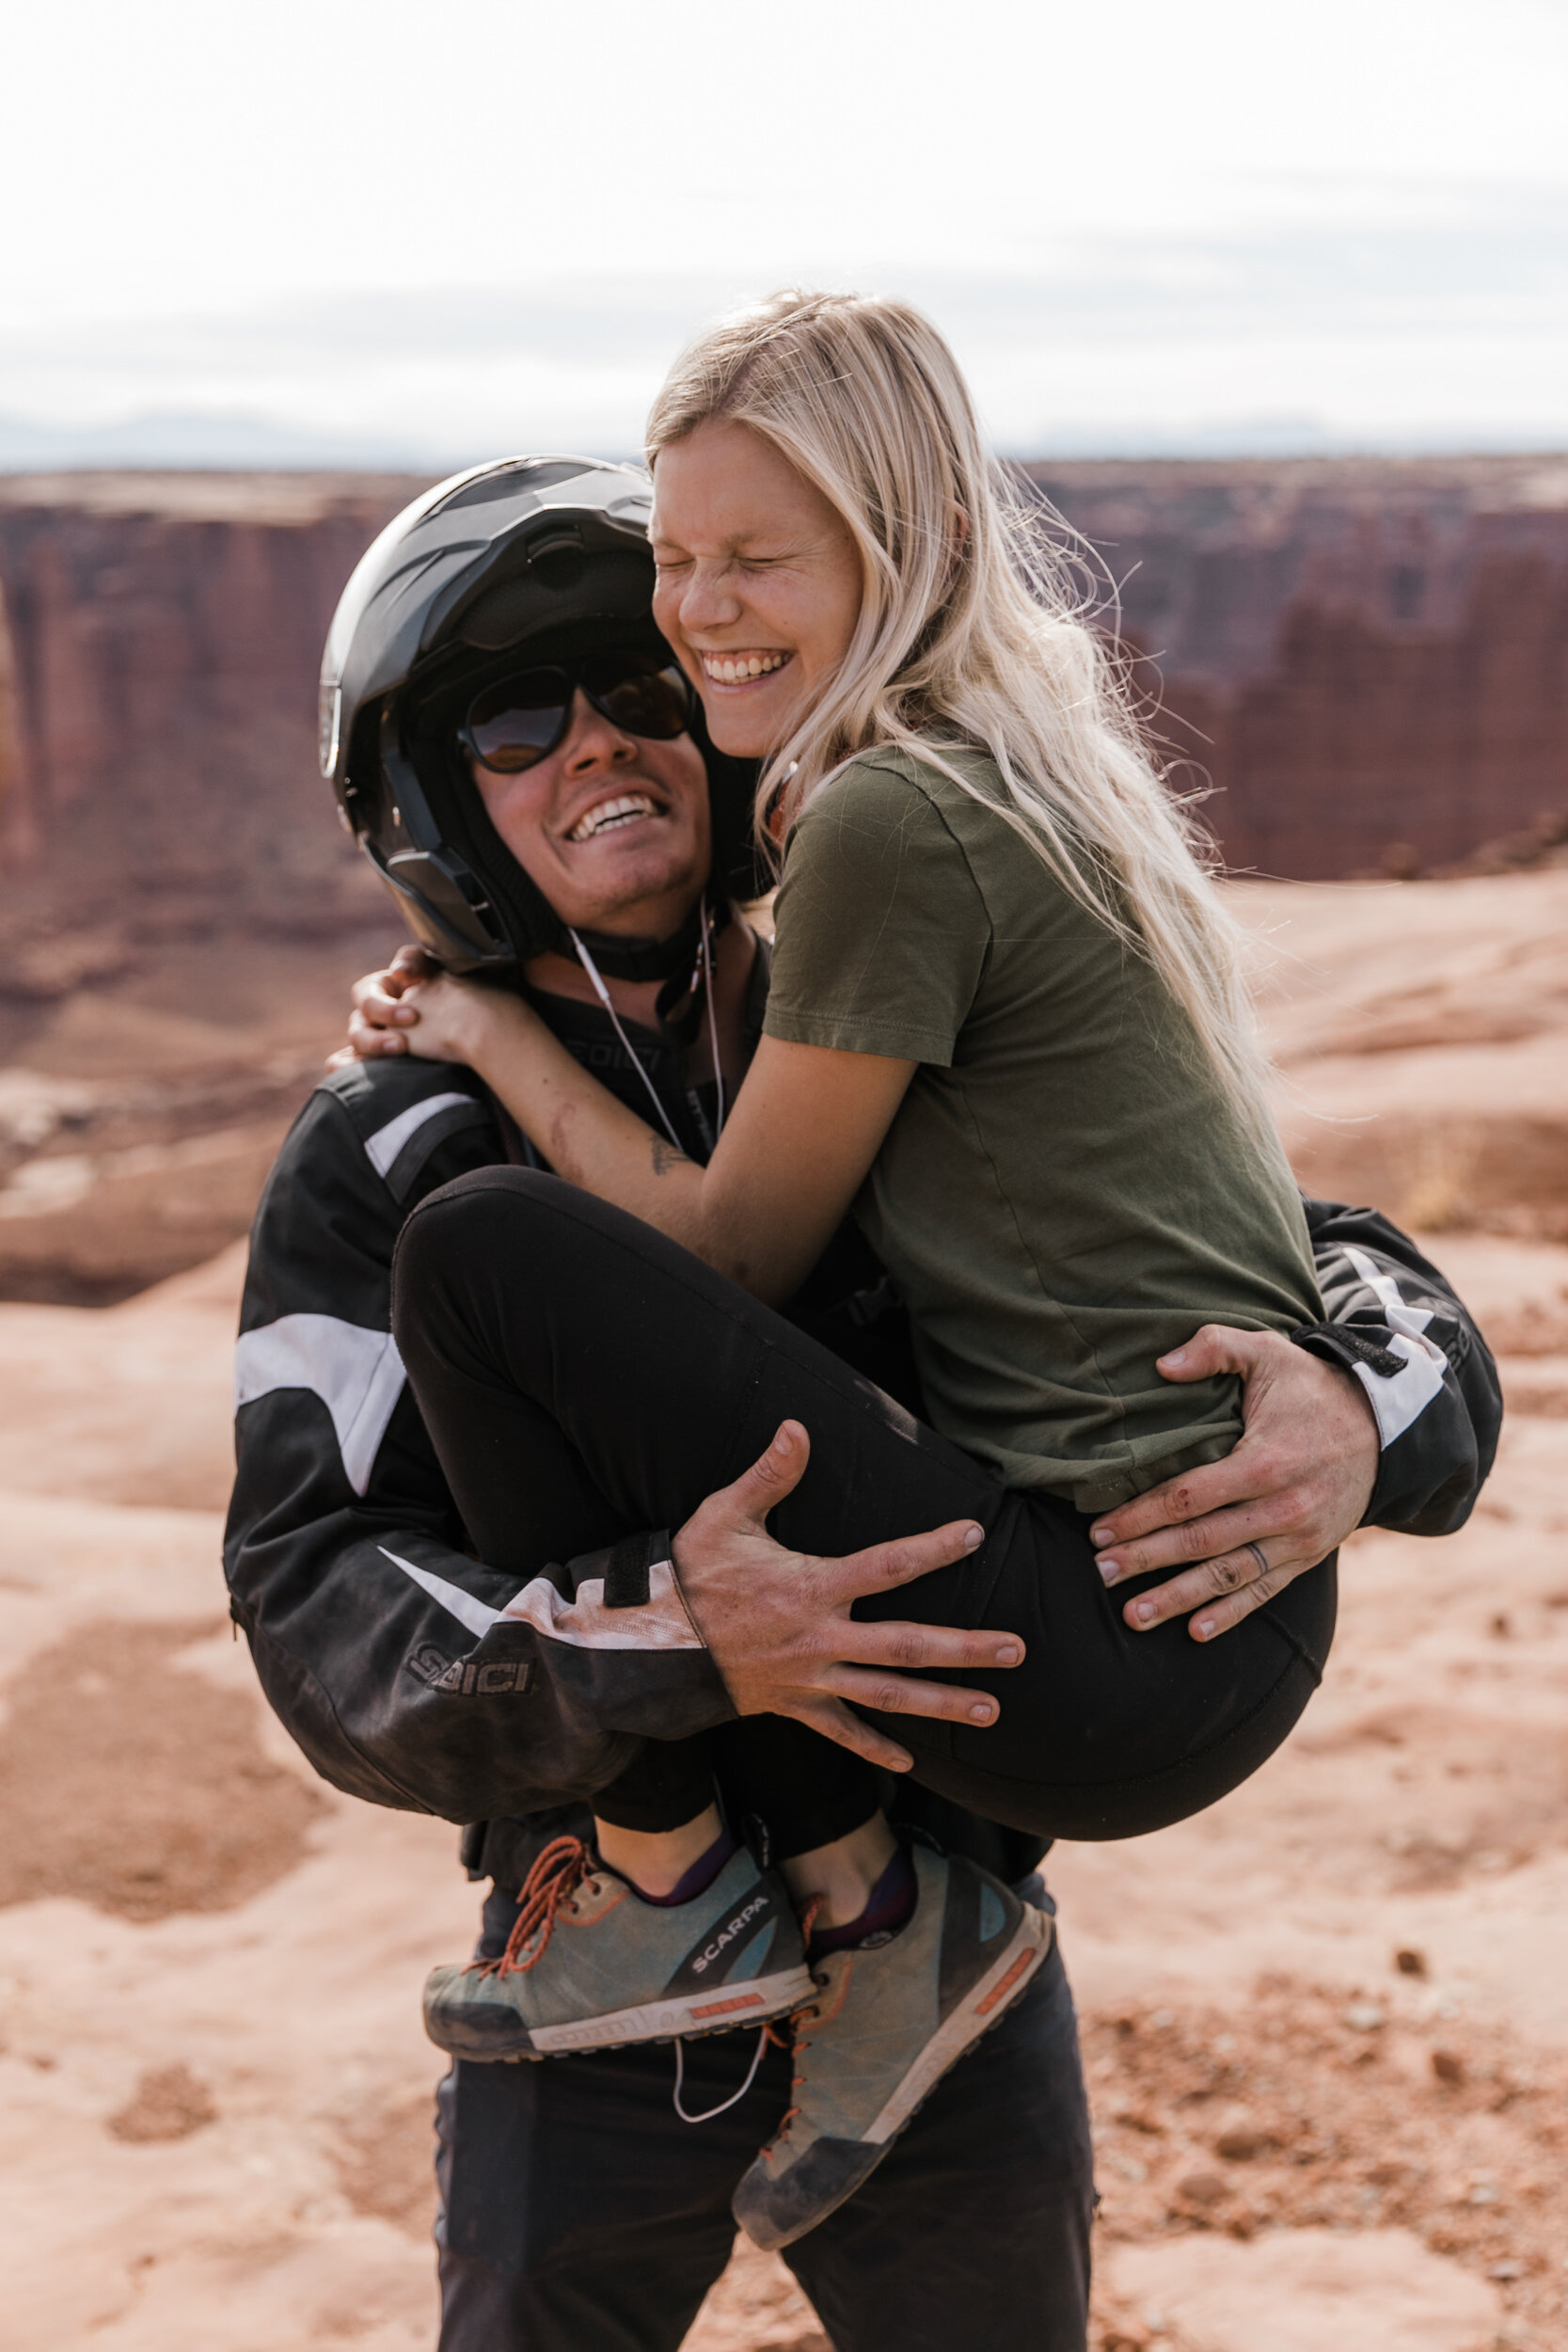 The Hearnes are Wedding Photographers in Moab, Utah | National Park Adventure Elopements